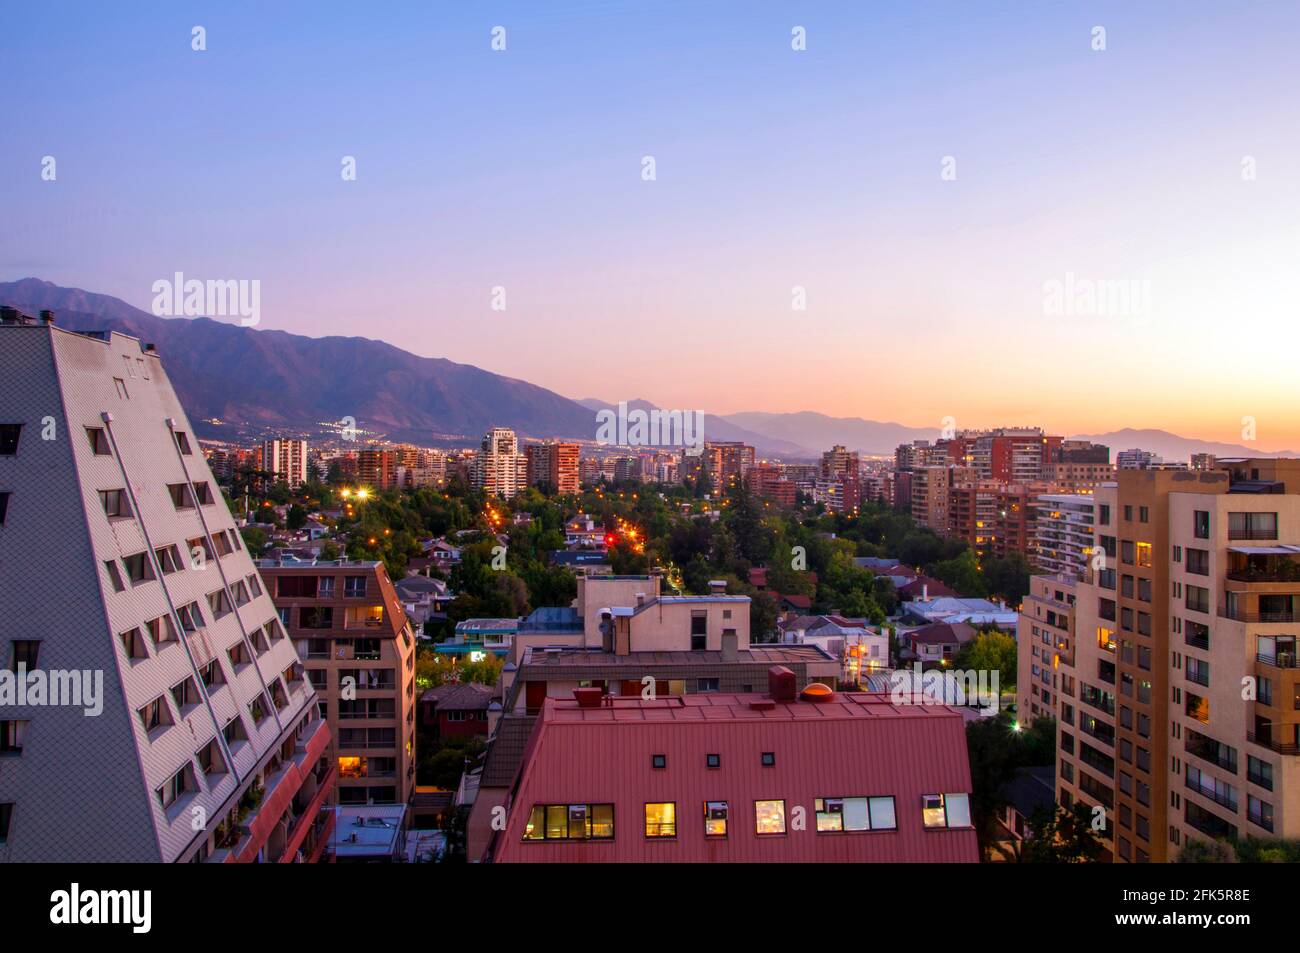 Panoramic view of the city, its houses, buildings and the mountains in the background. Santiago de Chile. Stock Photo